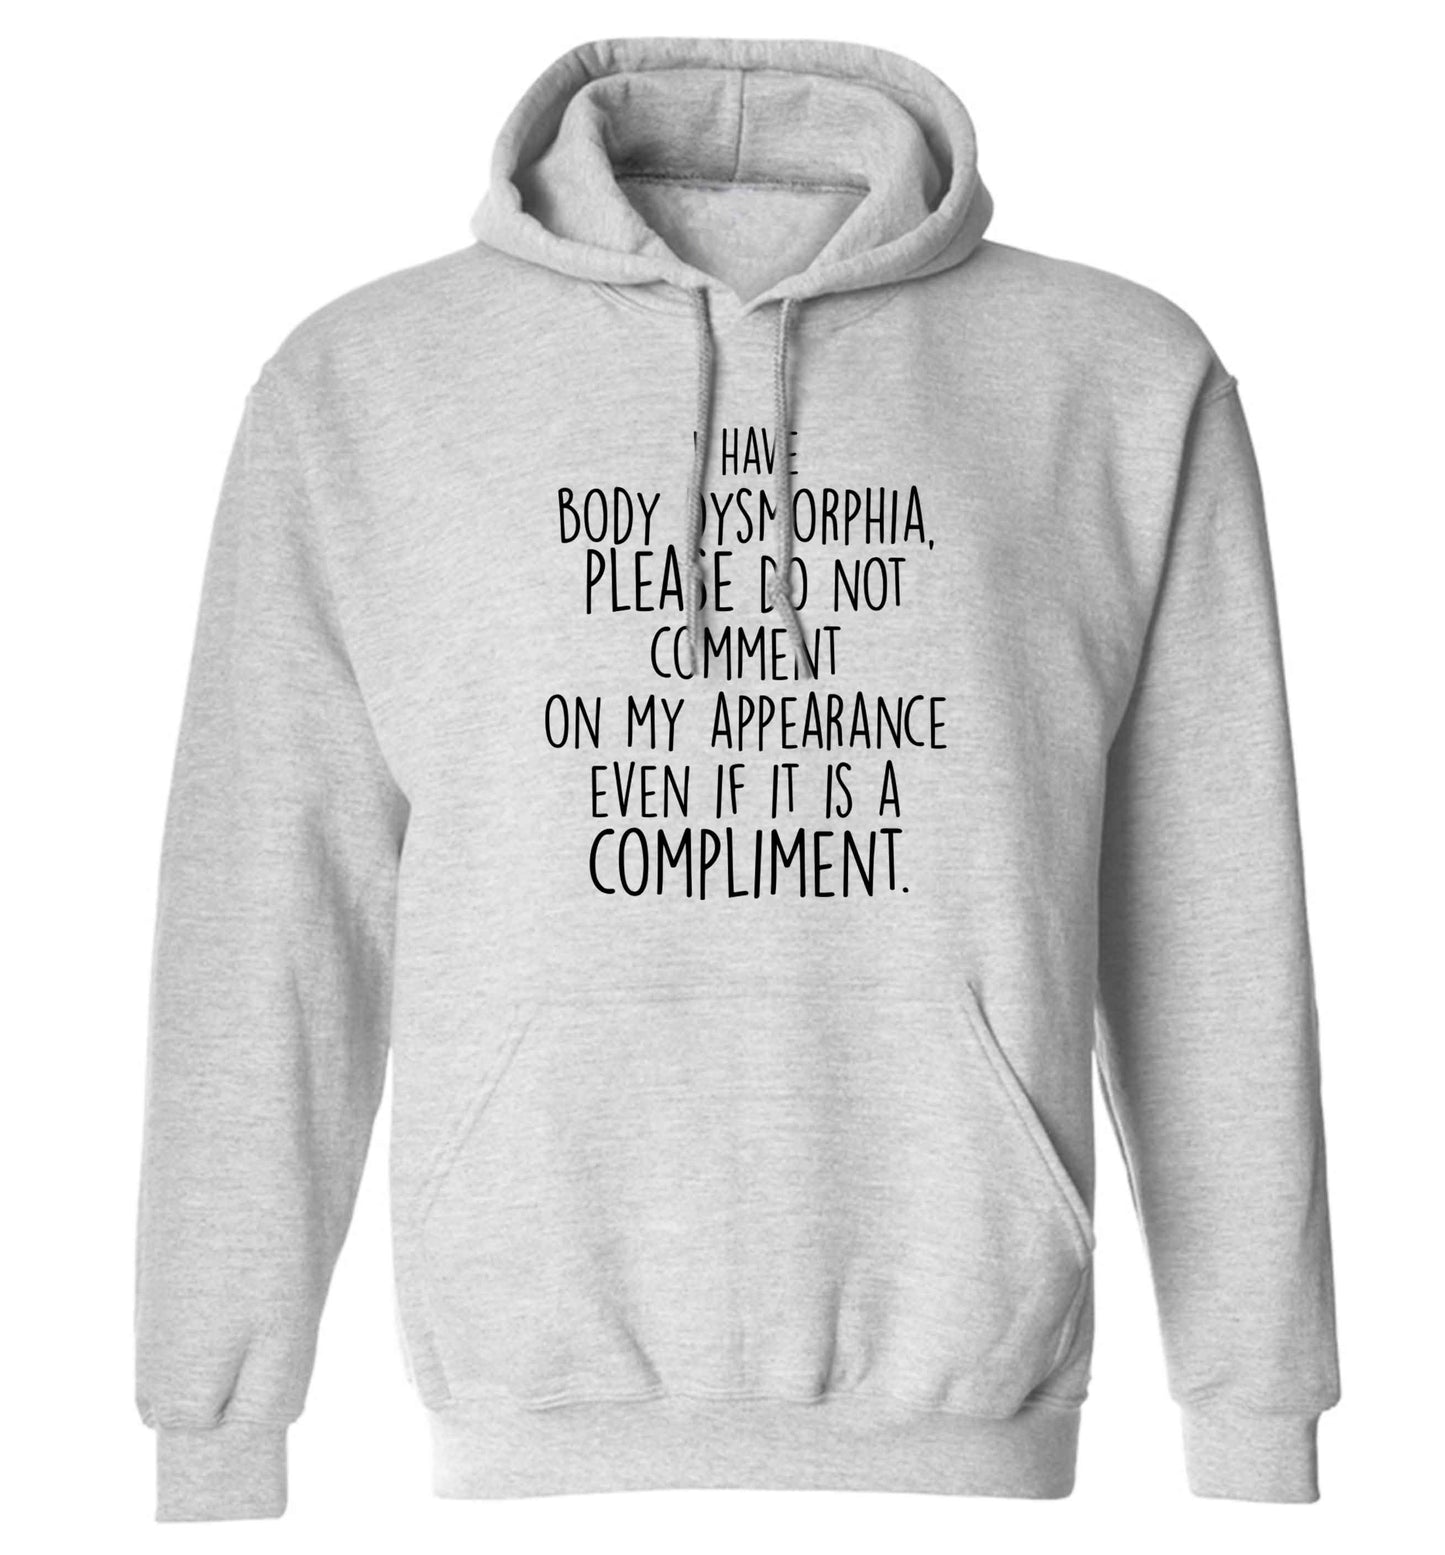 I have body dysmorphia, please do not comment on my appearance even if it is a compliment adults unisex grey hoodie 2XL